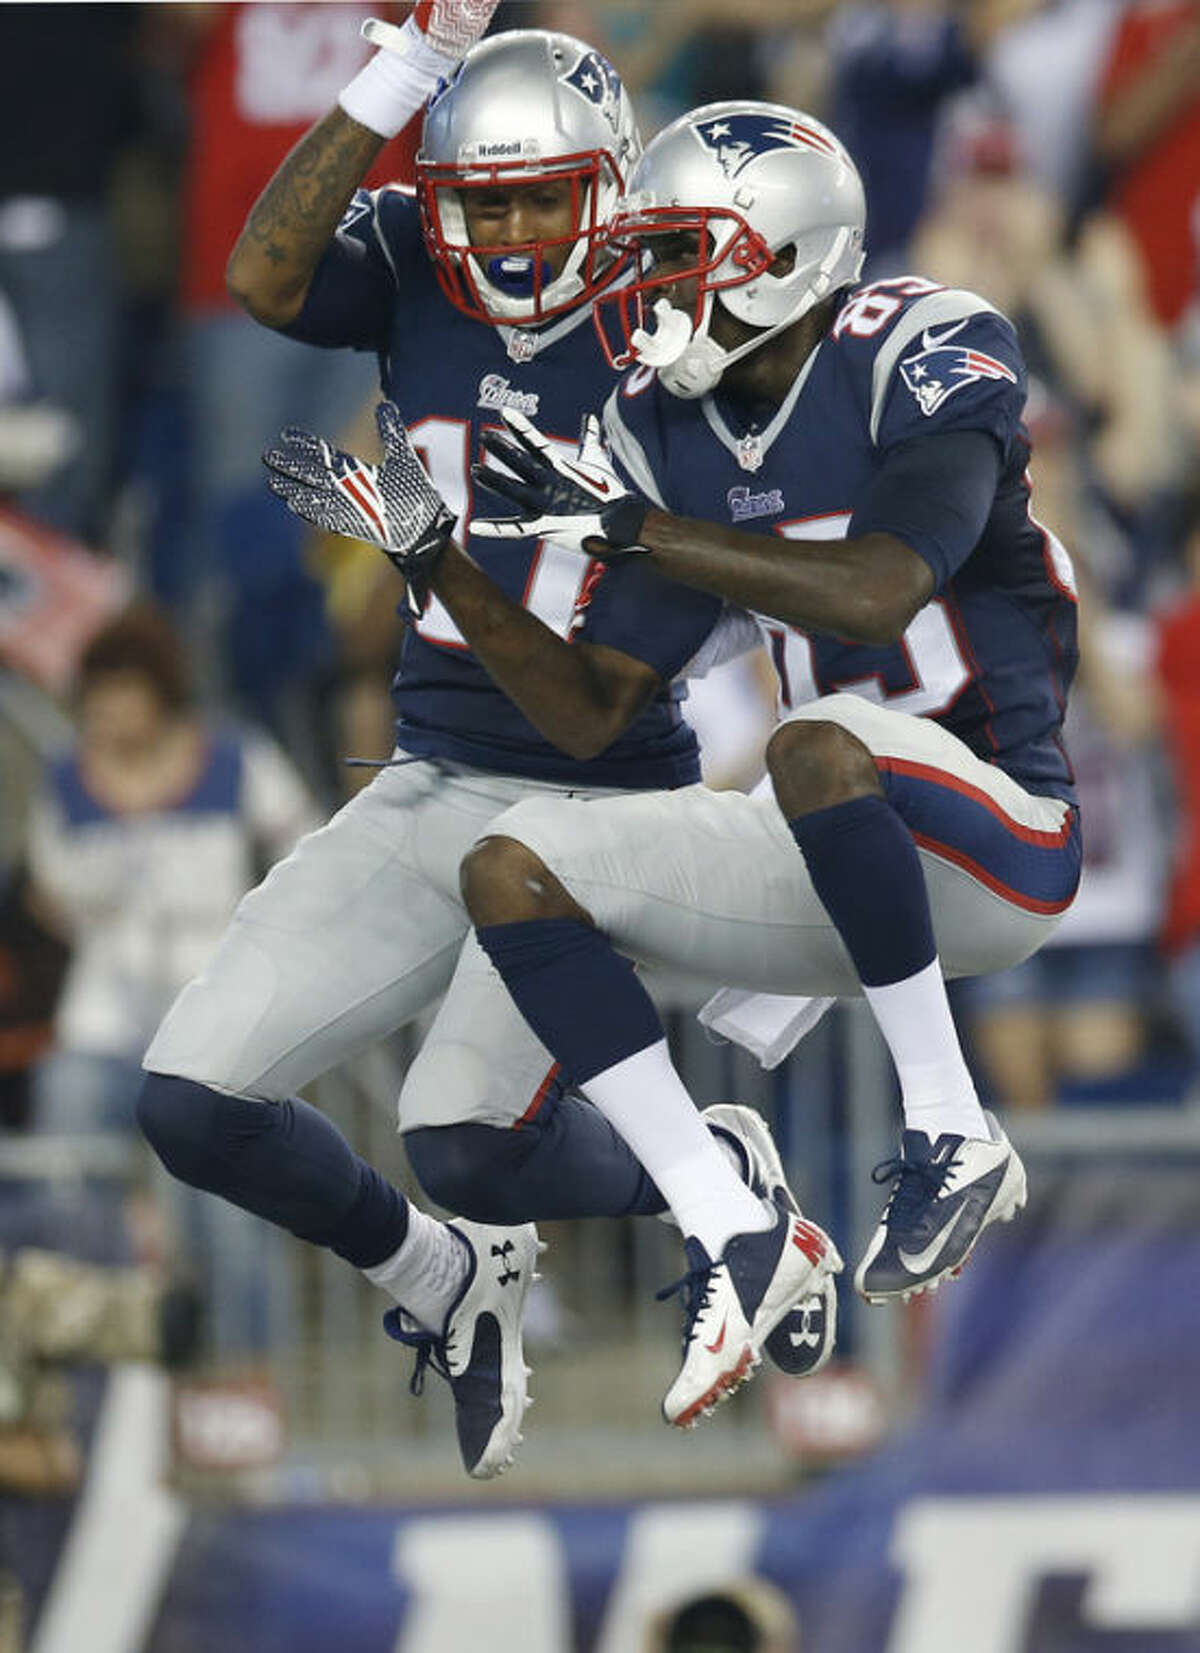 New England Patriots wide receiver Aaron Dobson (17) celebrates his touchdown against the New York Jets with wide receiver Kenbrell Thompkins, right, in the first quarter an NFL football game Thursday, Sept. 12, 2013, in Foxborough, Mass. (AP Photo/Elise Amendola)